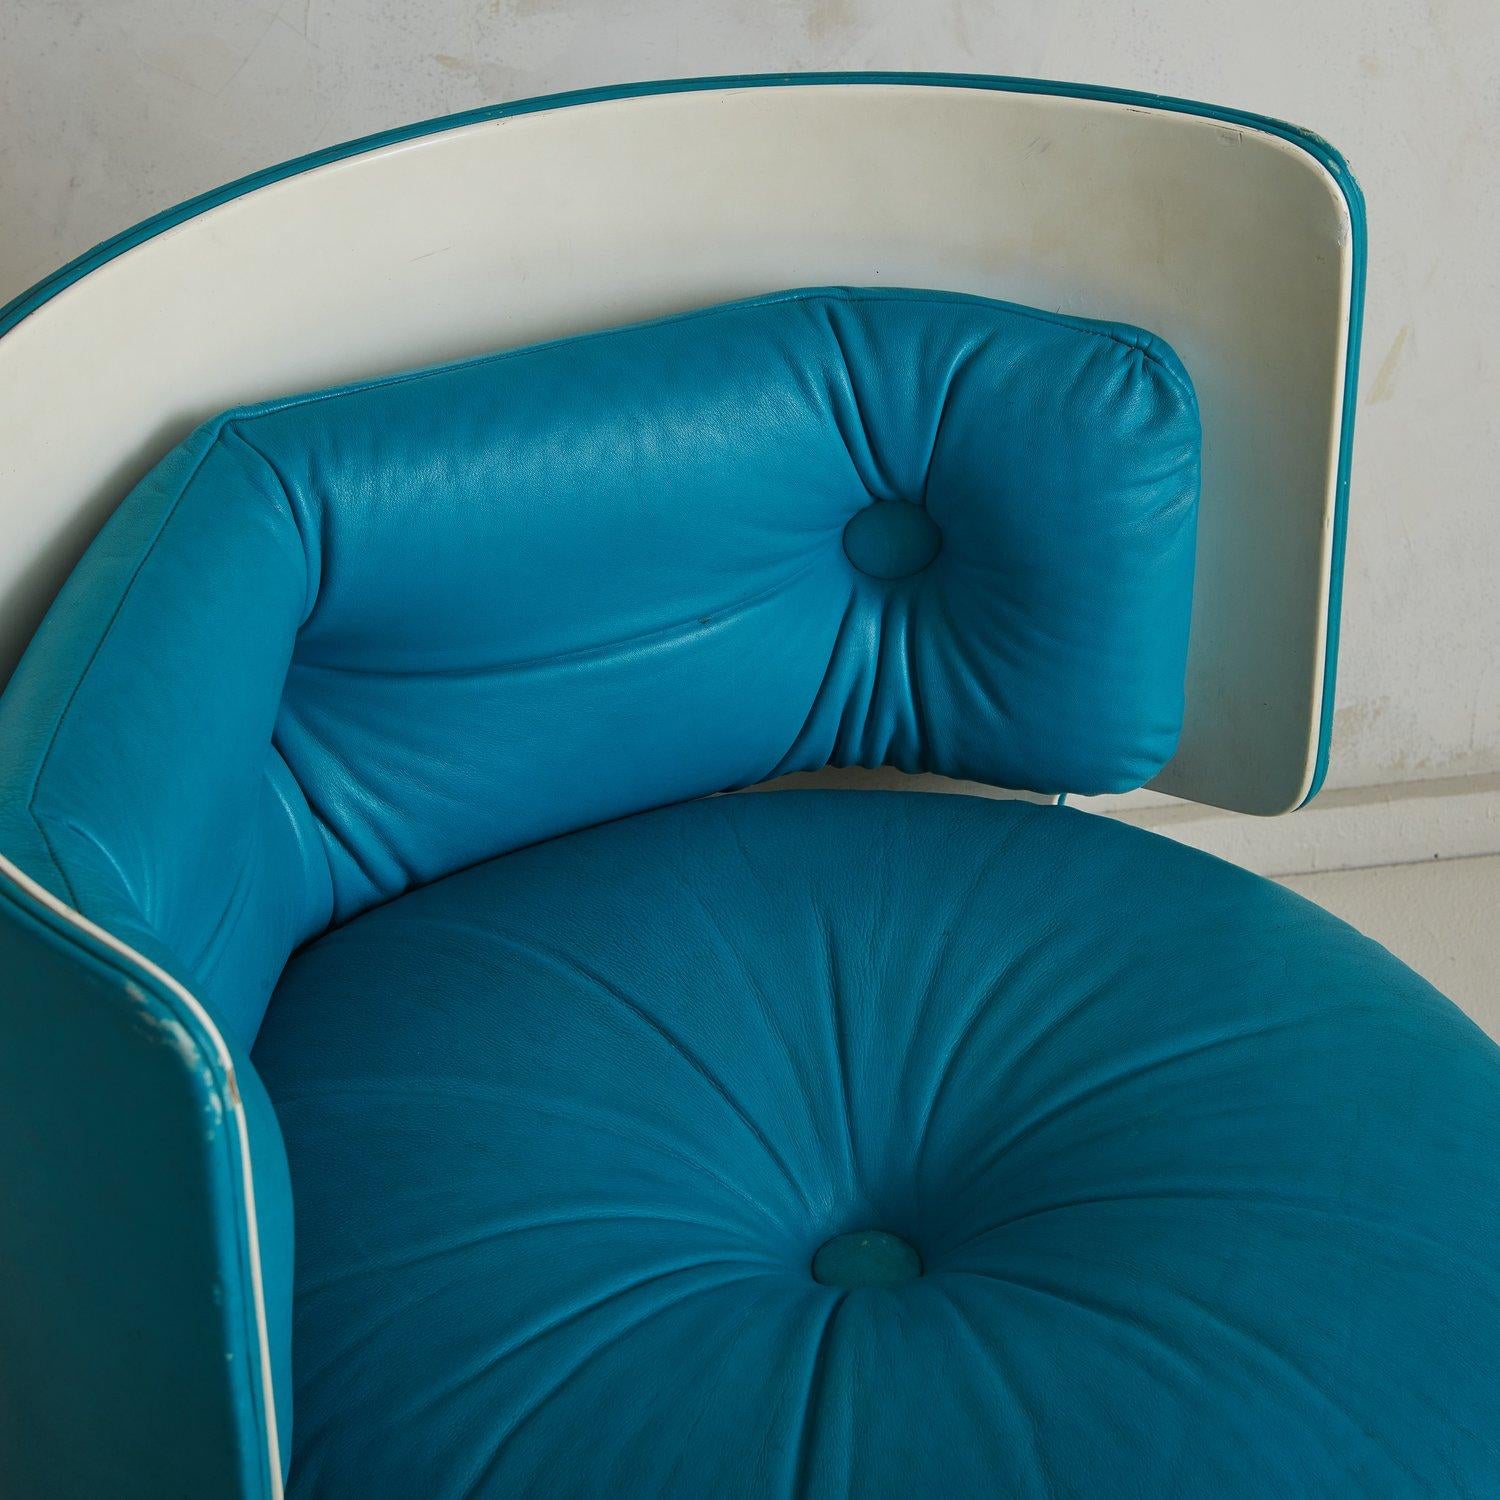 Mid-20th Century Blue ‘Dilly Dally’ Chair by Luigi Massoni for Poltrona Frau, Italy 1968 For Sale